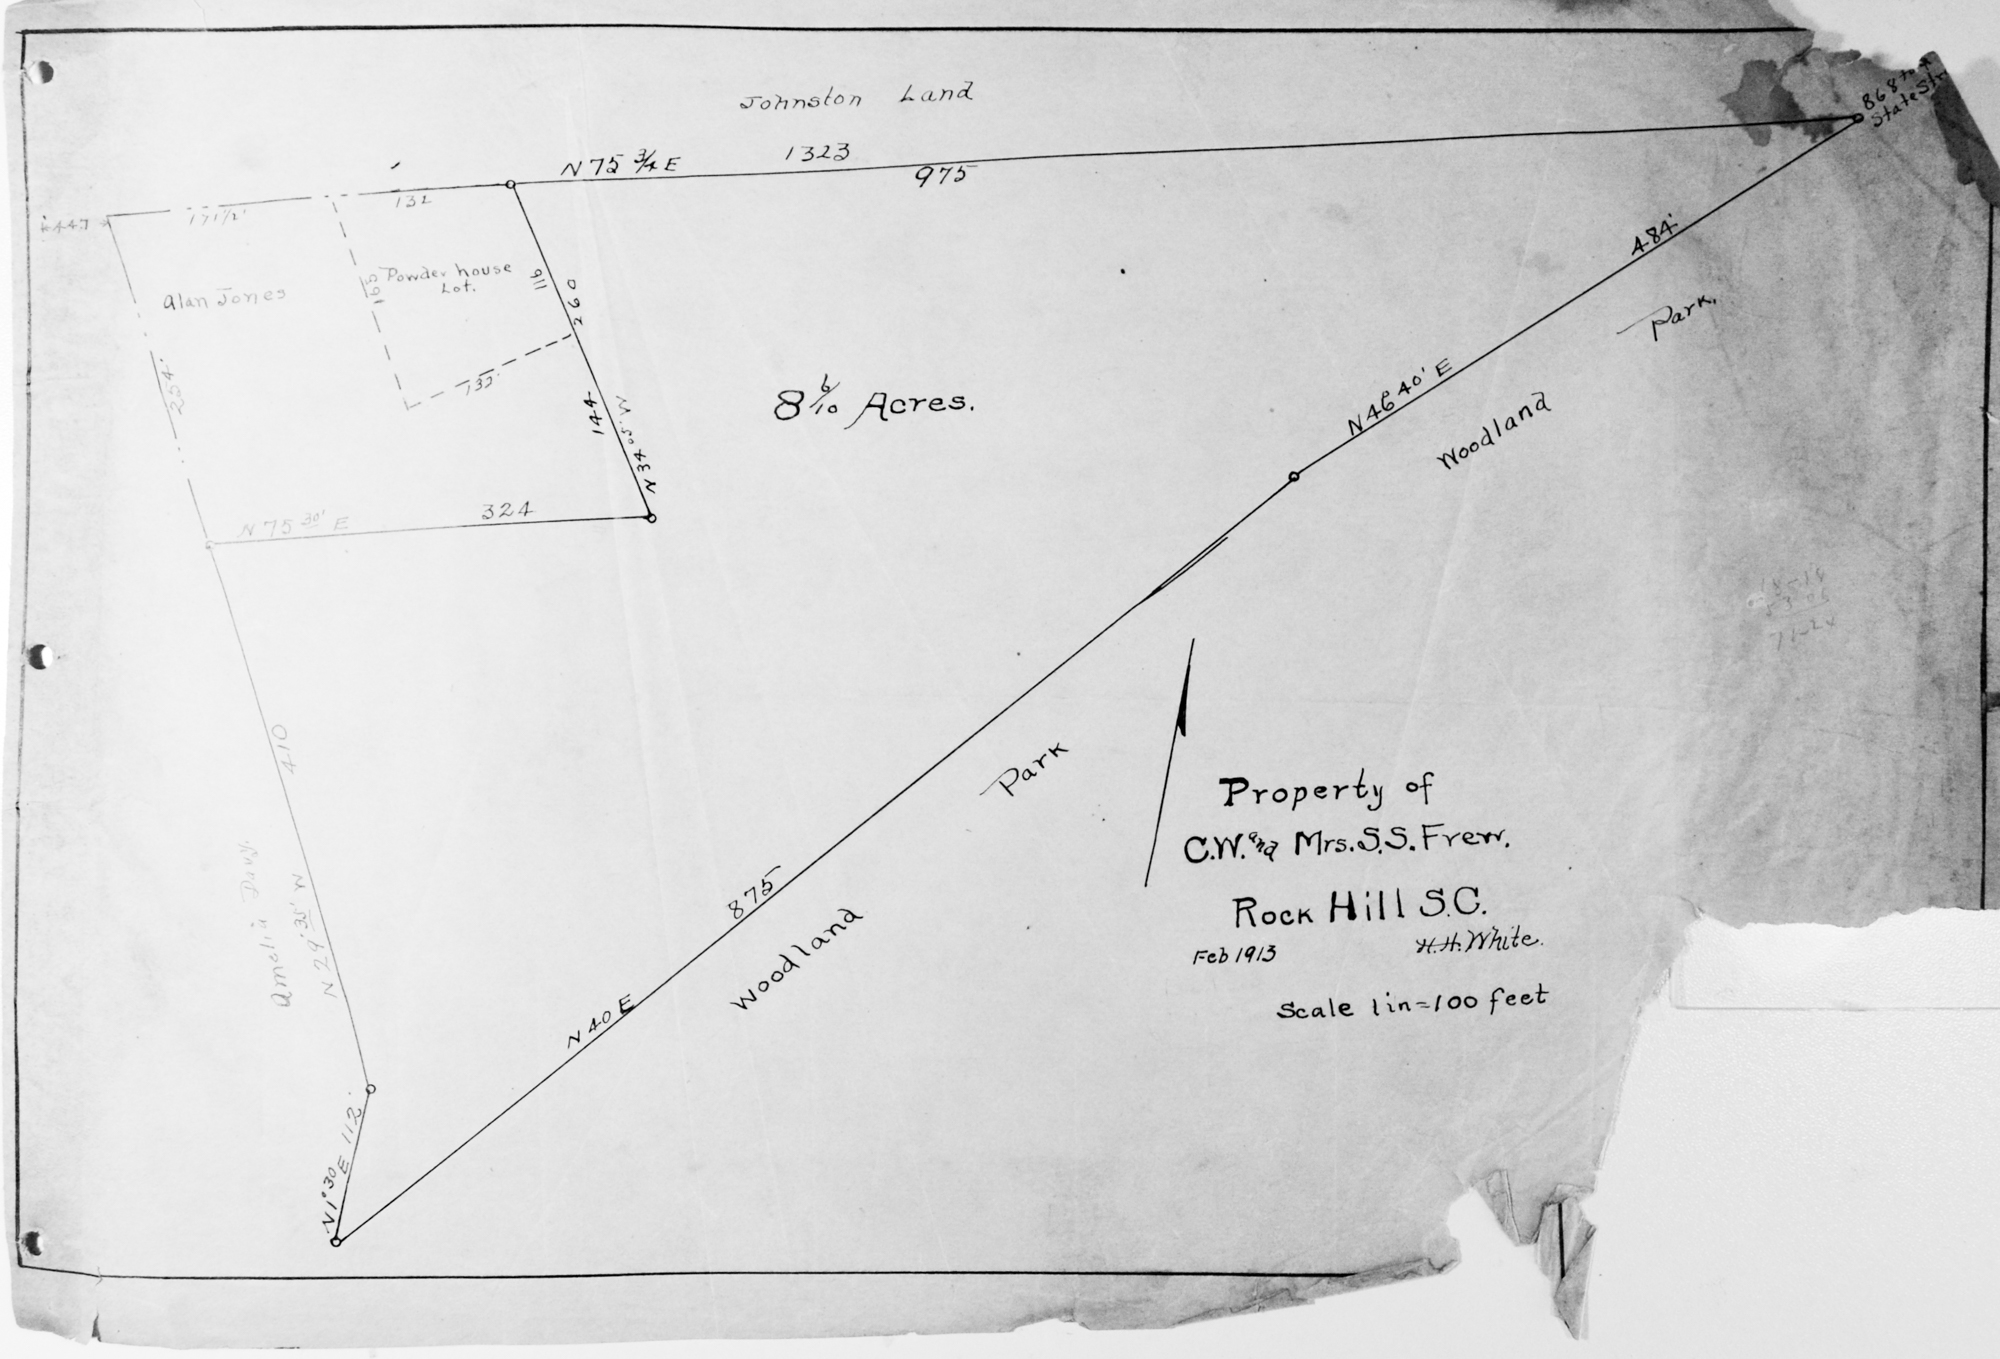 LAND PLAT FOR MRS. S.S. FREW OF 8.6 ACRES